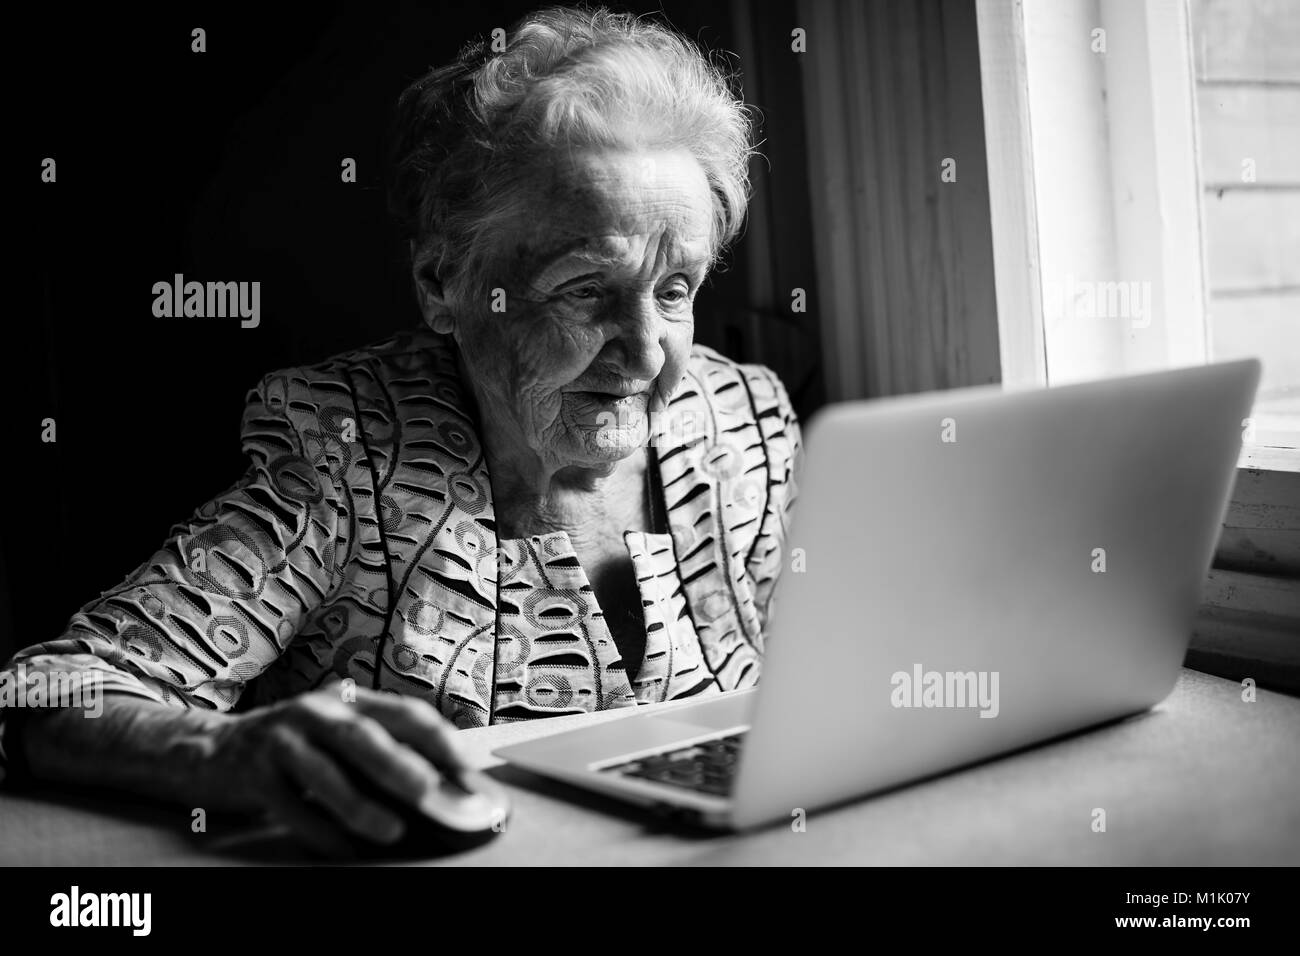 An elderly woman works on a laptop. Black-and-white photograph. Stock Photo